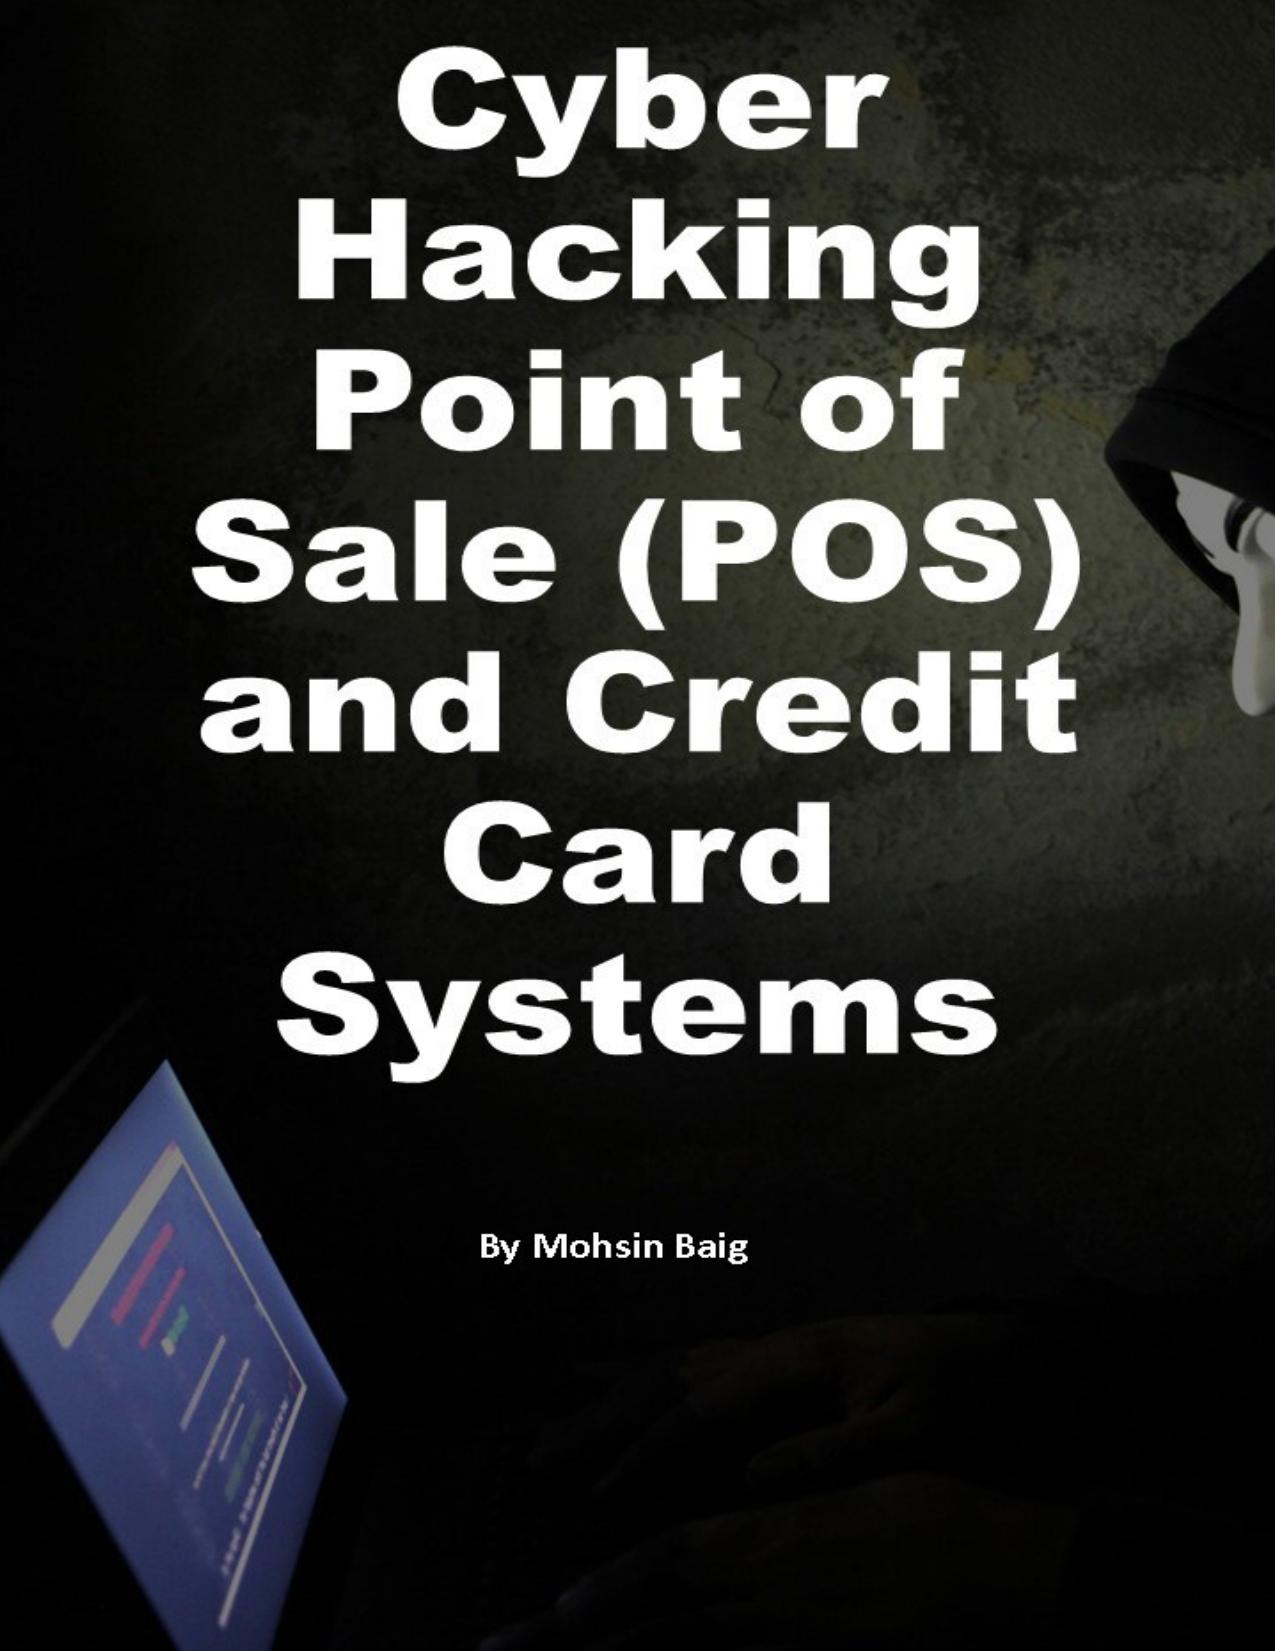 Mastering Core Essentials: Cyber Hacking Point of Sale and Credit Card Payments (POS) by Baig Mohsin